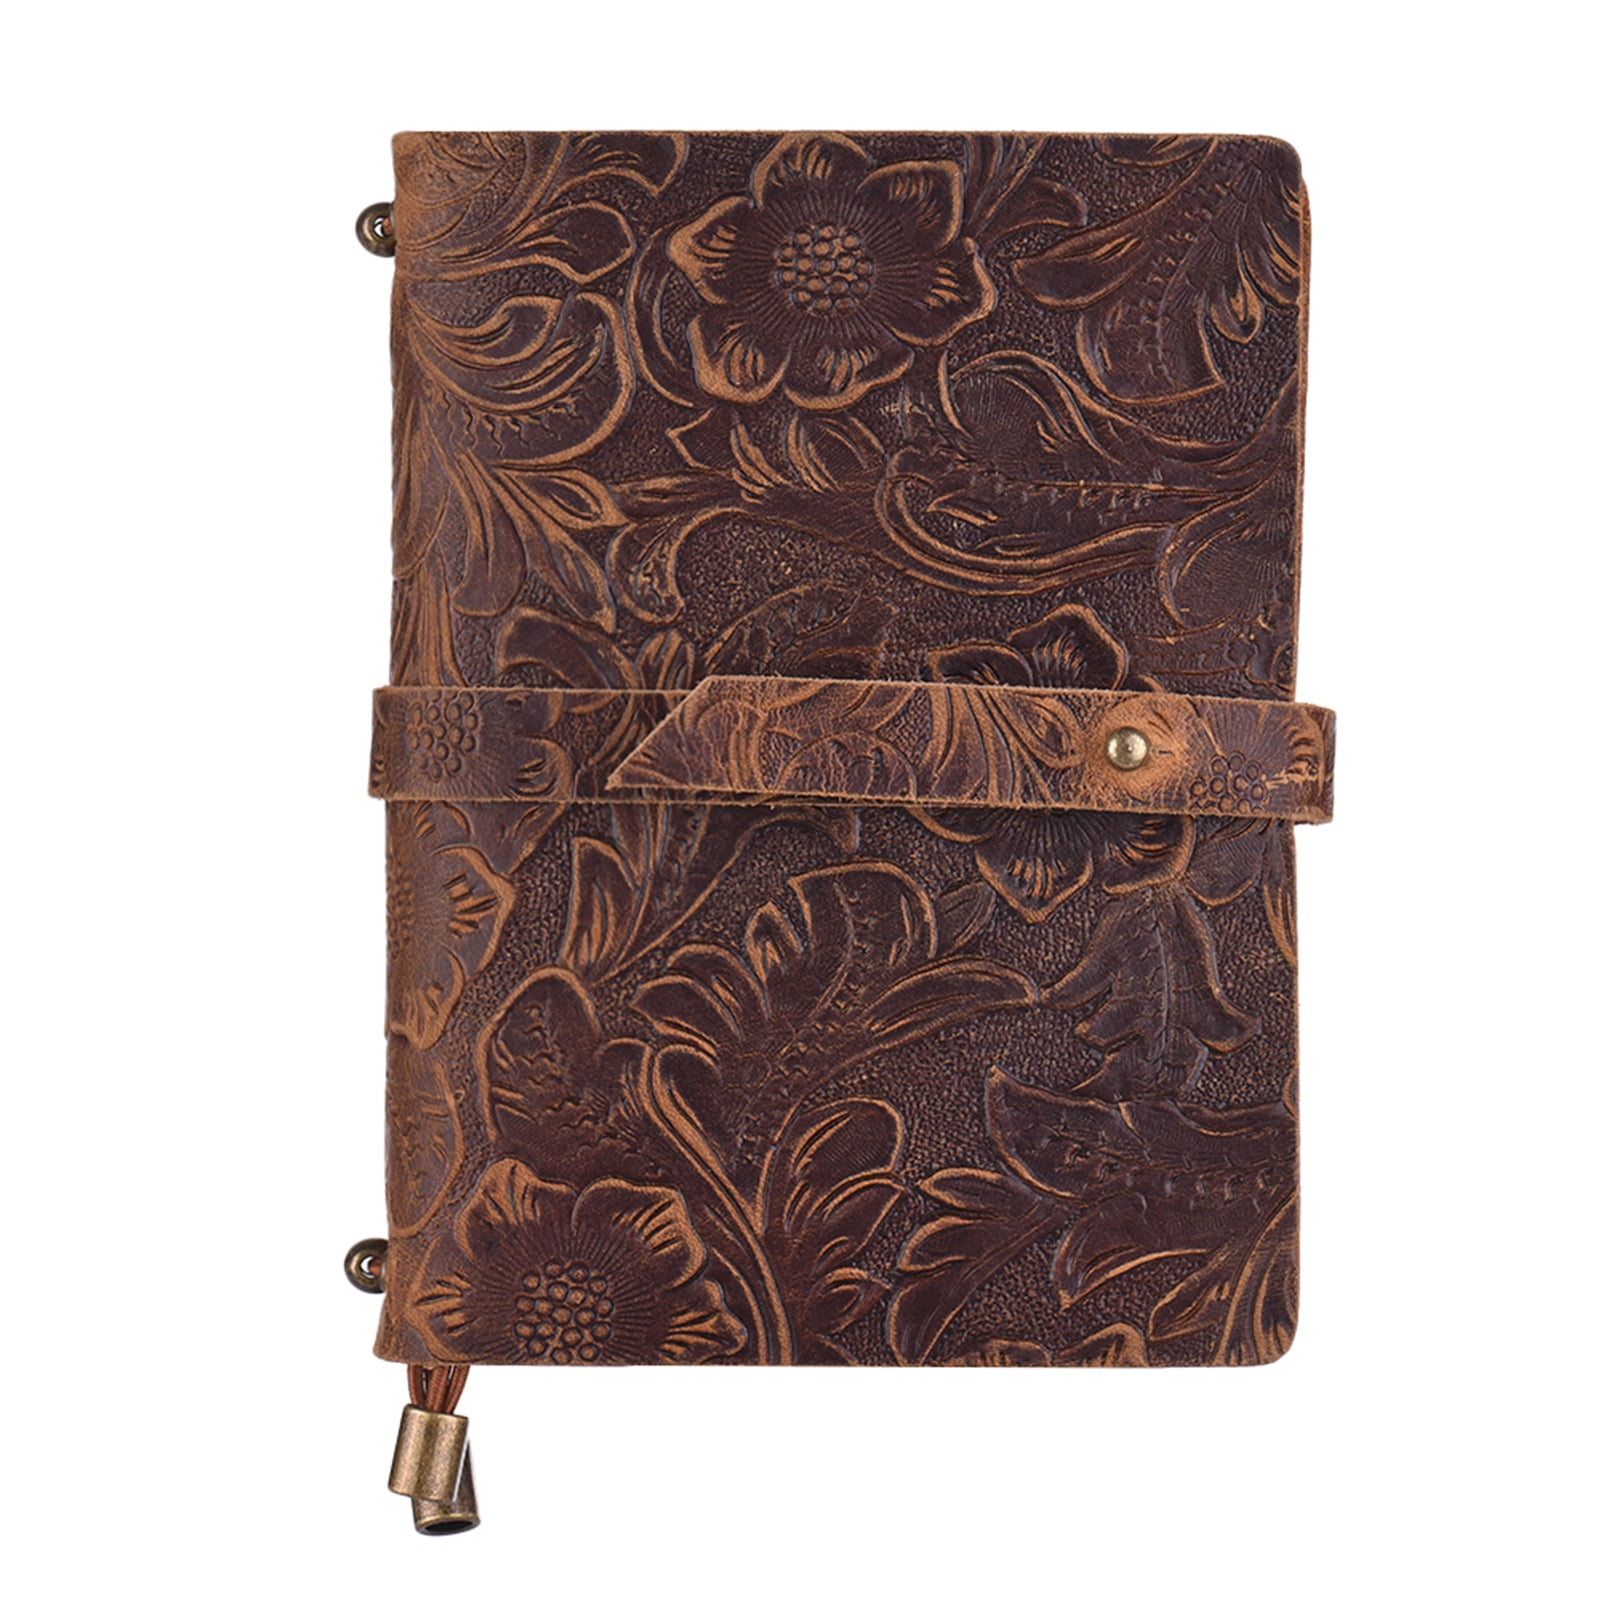 REFILLABLE Genuine leather journal notebook notepad Blank Plain Brown 